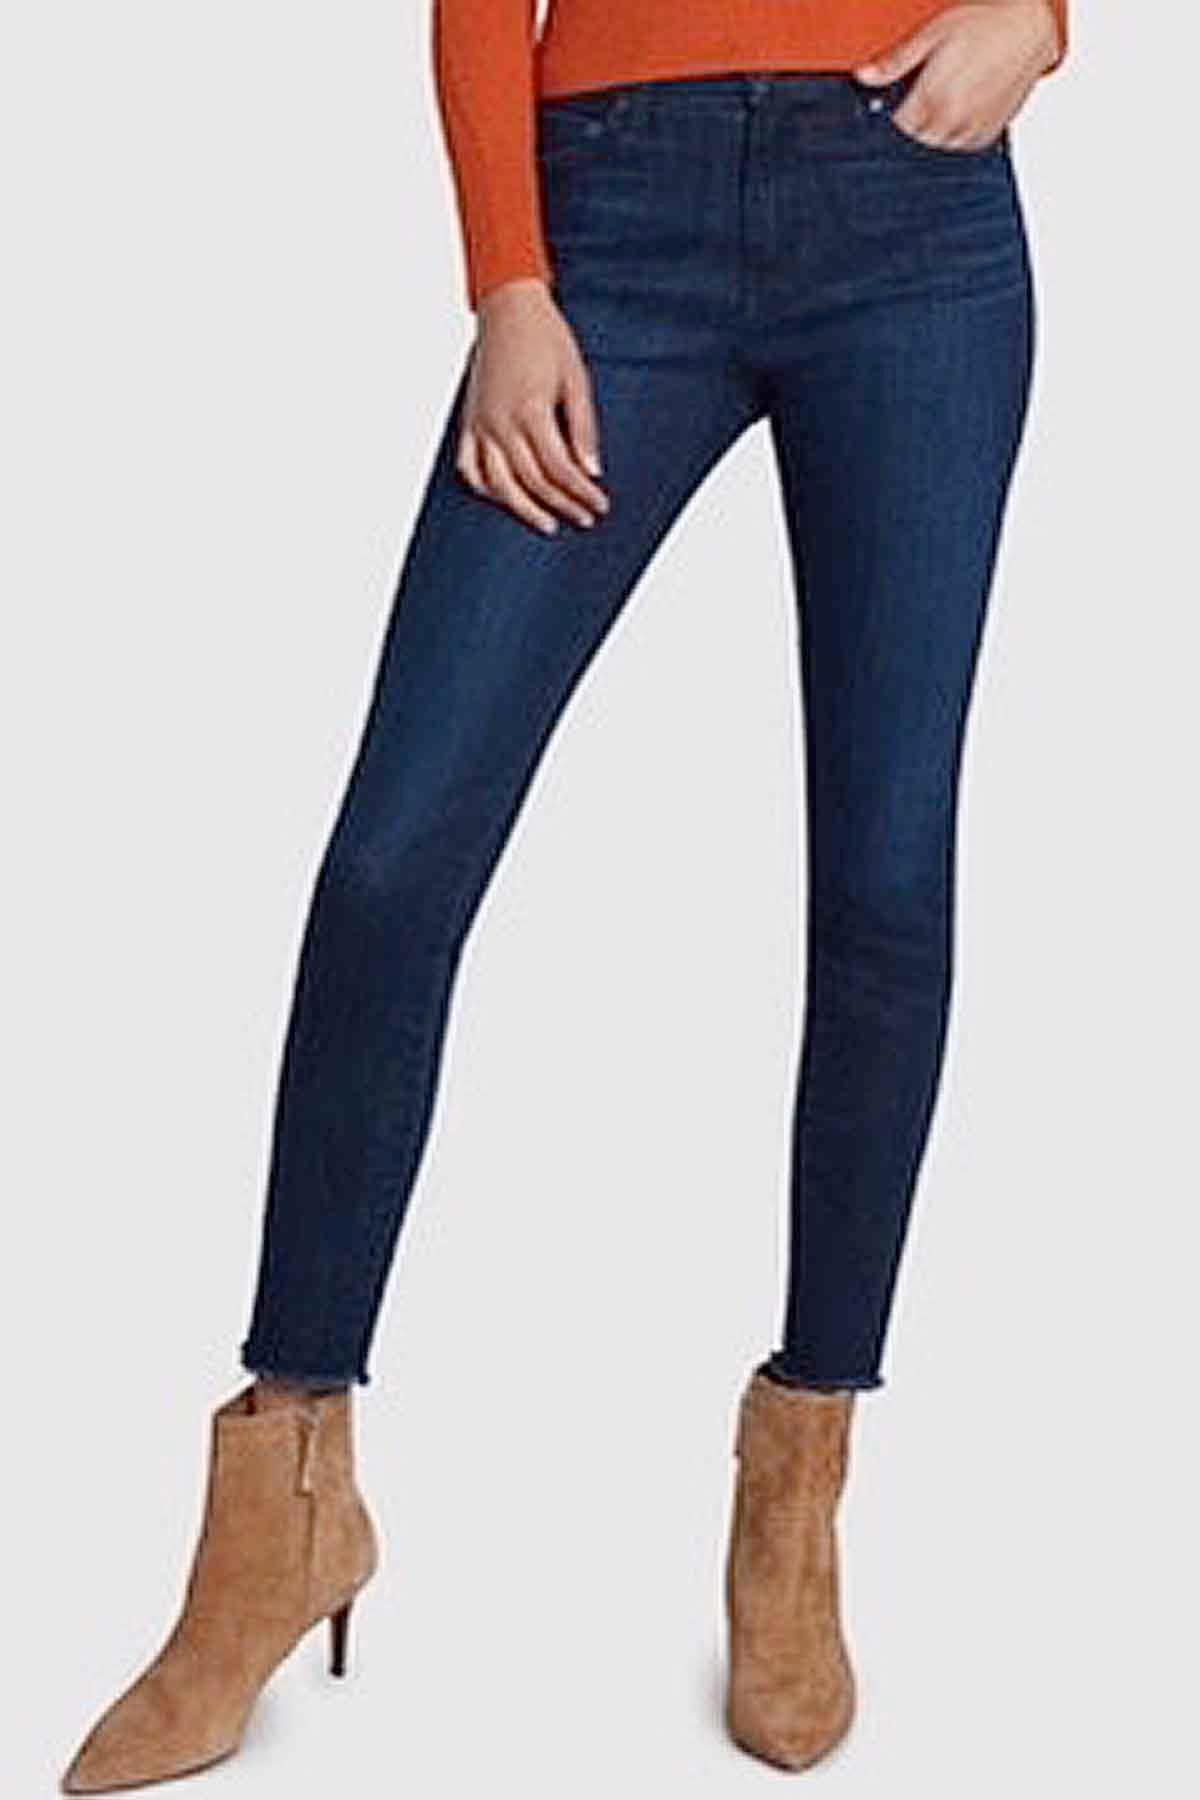 High Rise 7/8 Length Jean by Principle Denim in Night Moves Wash